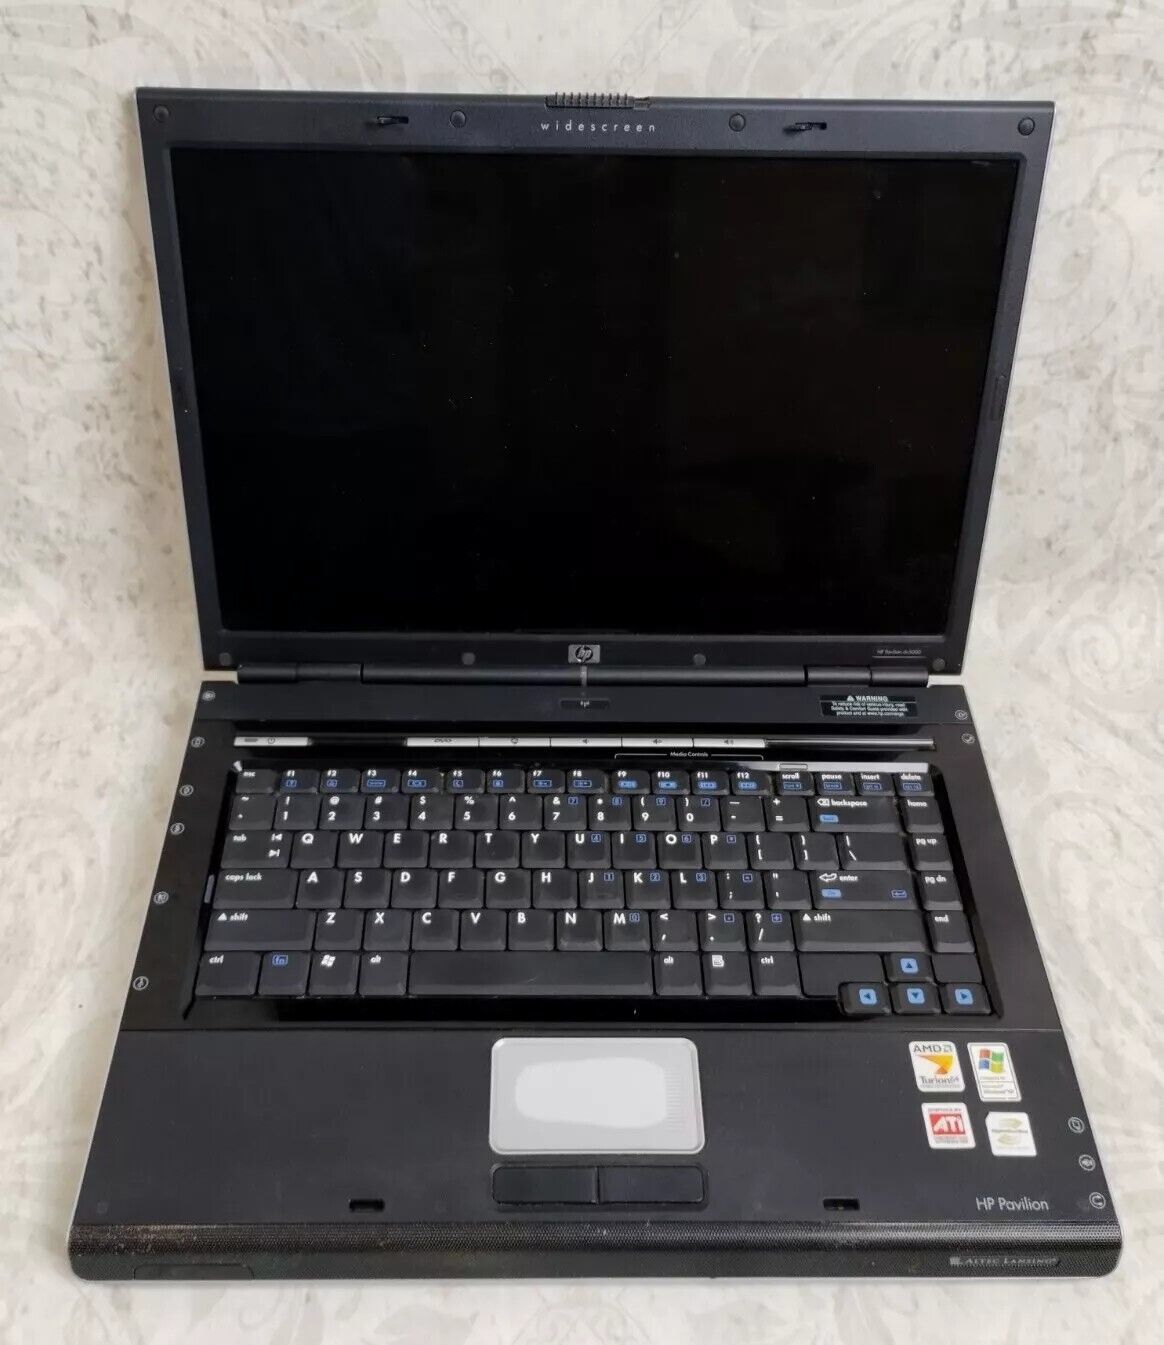 Hp Pavilion Dv5000 Laptop FOR PARTS ONLY No Power Cord to Test 